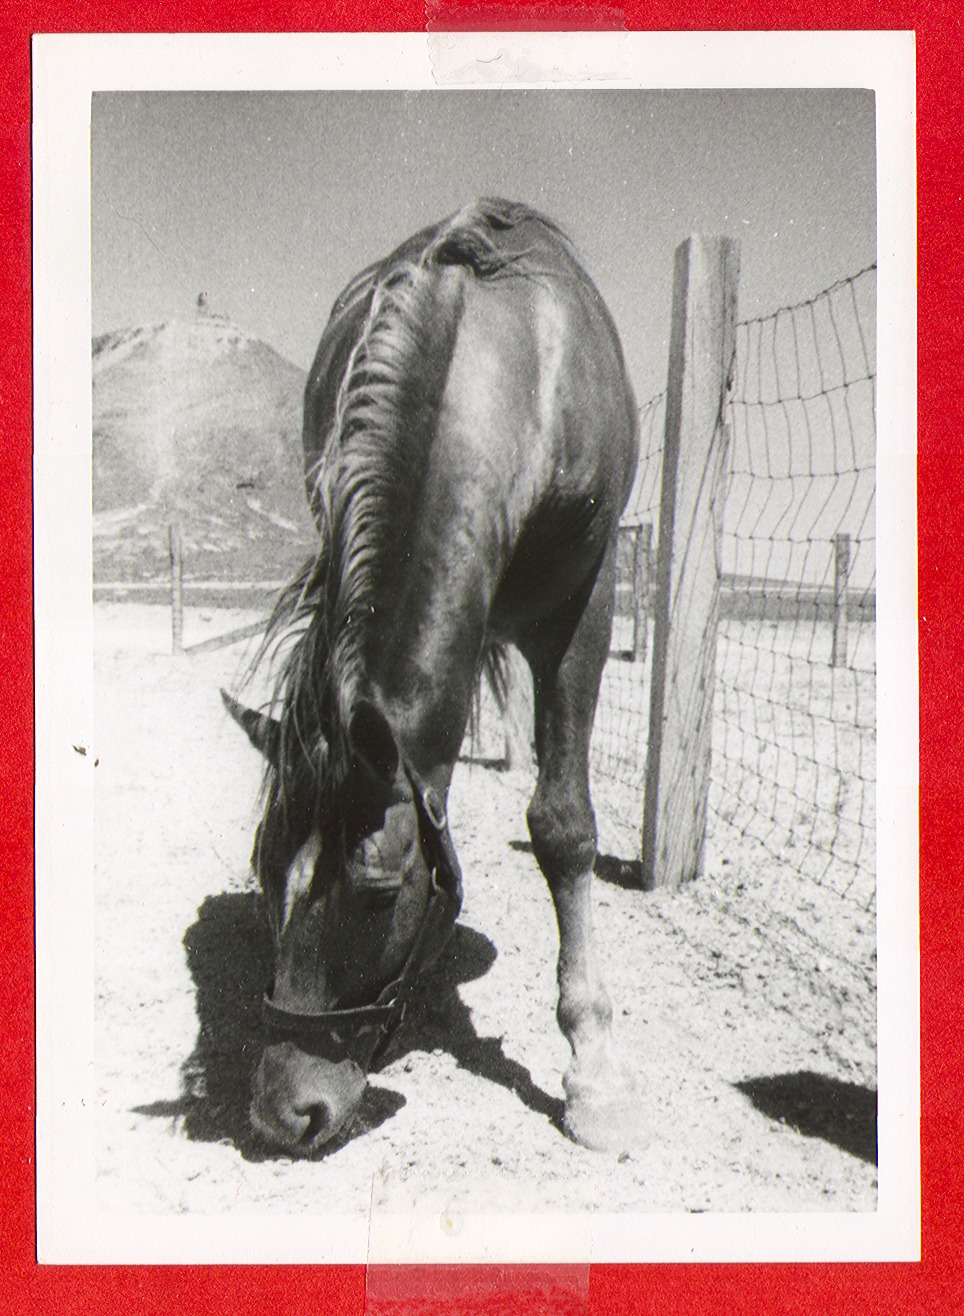 The same horse (Clara Bow's horse on the ranch): photographic print